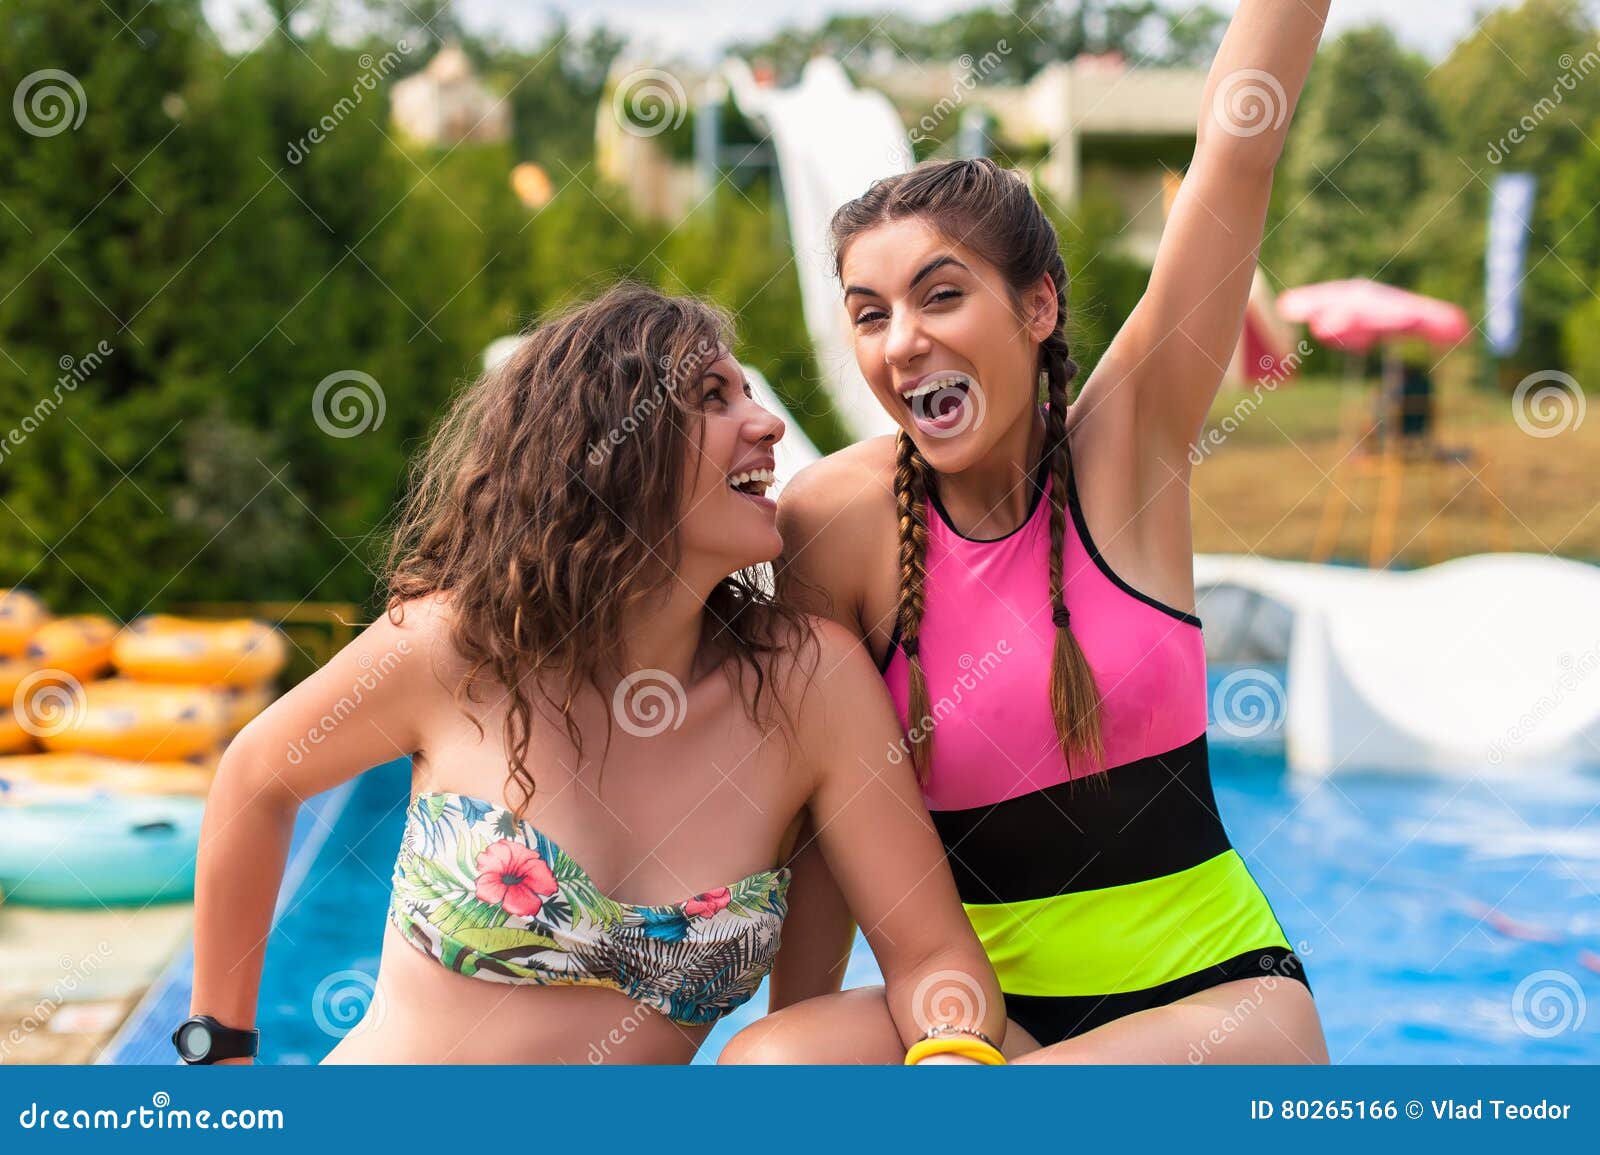 Hot young girls at water park